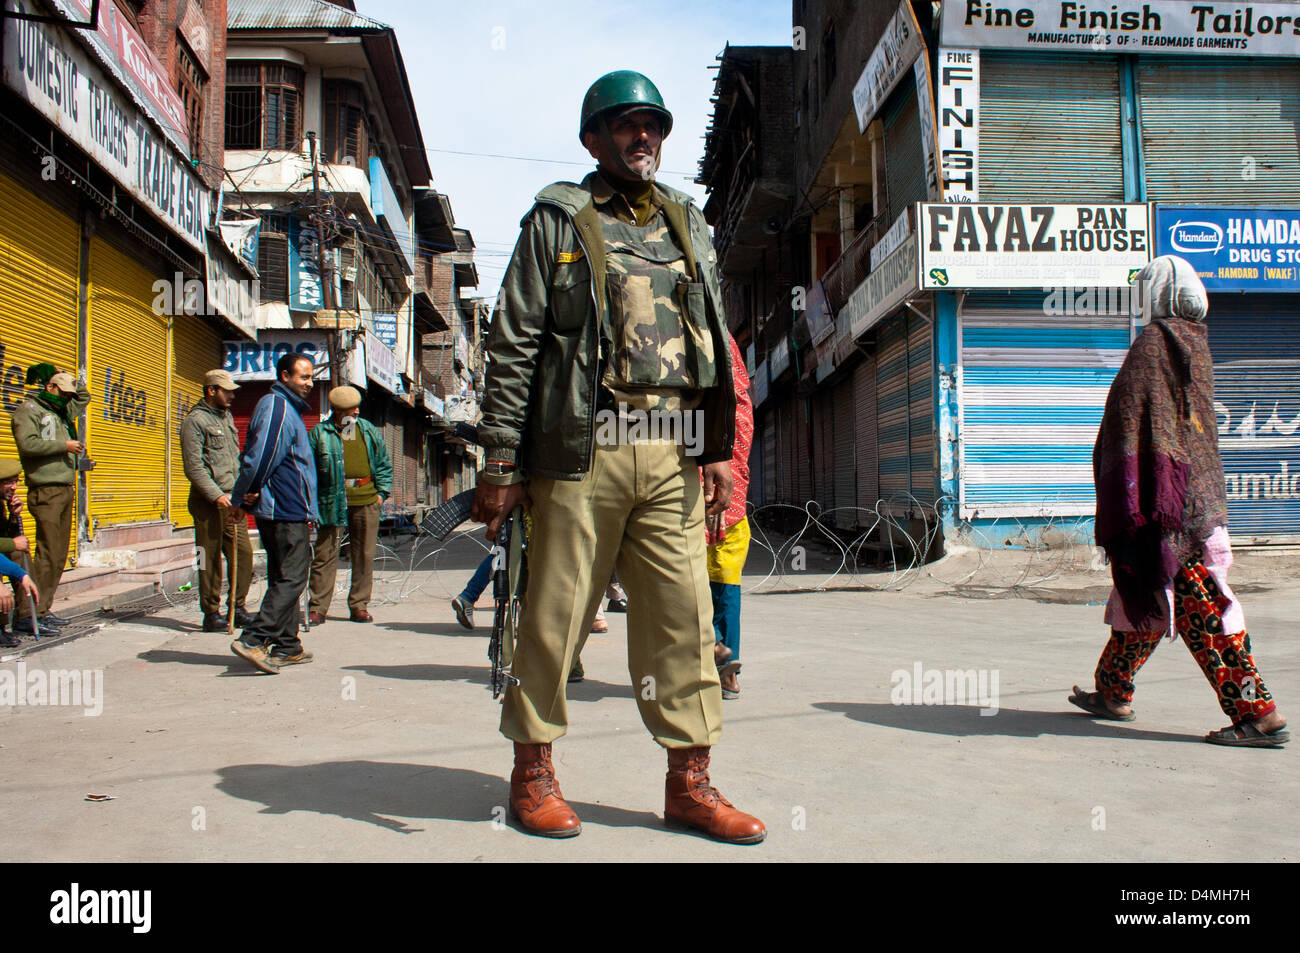 Srinagar, Indian Administered Kashmir, Saturday  16th March 2013. Indian policemen guard the area which is still under curfew in Srinagar .  Normal life remains affected in Indian-administered Kashmir however Indian authorities lifted curfew from many parts of Kashmir, which was put under a strict curfew for many days  worried about massive public protests following the killing of Kashmiri civilian.  (Yawar Nazir Kabli/ Alamy) Stock Photo